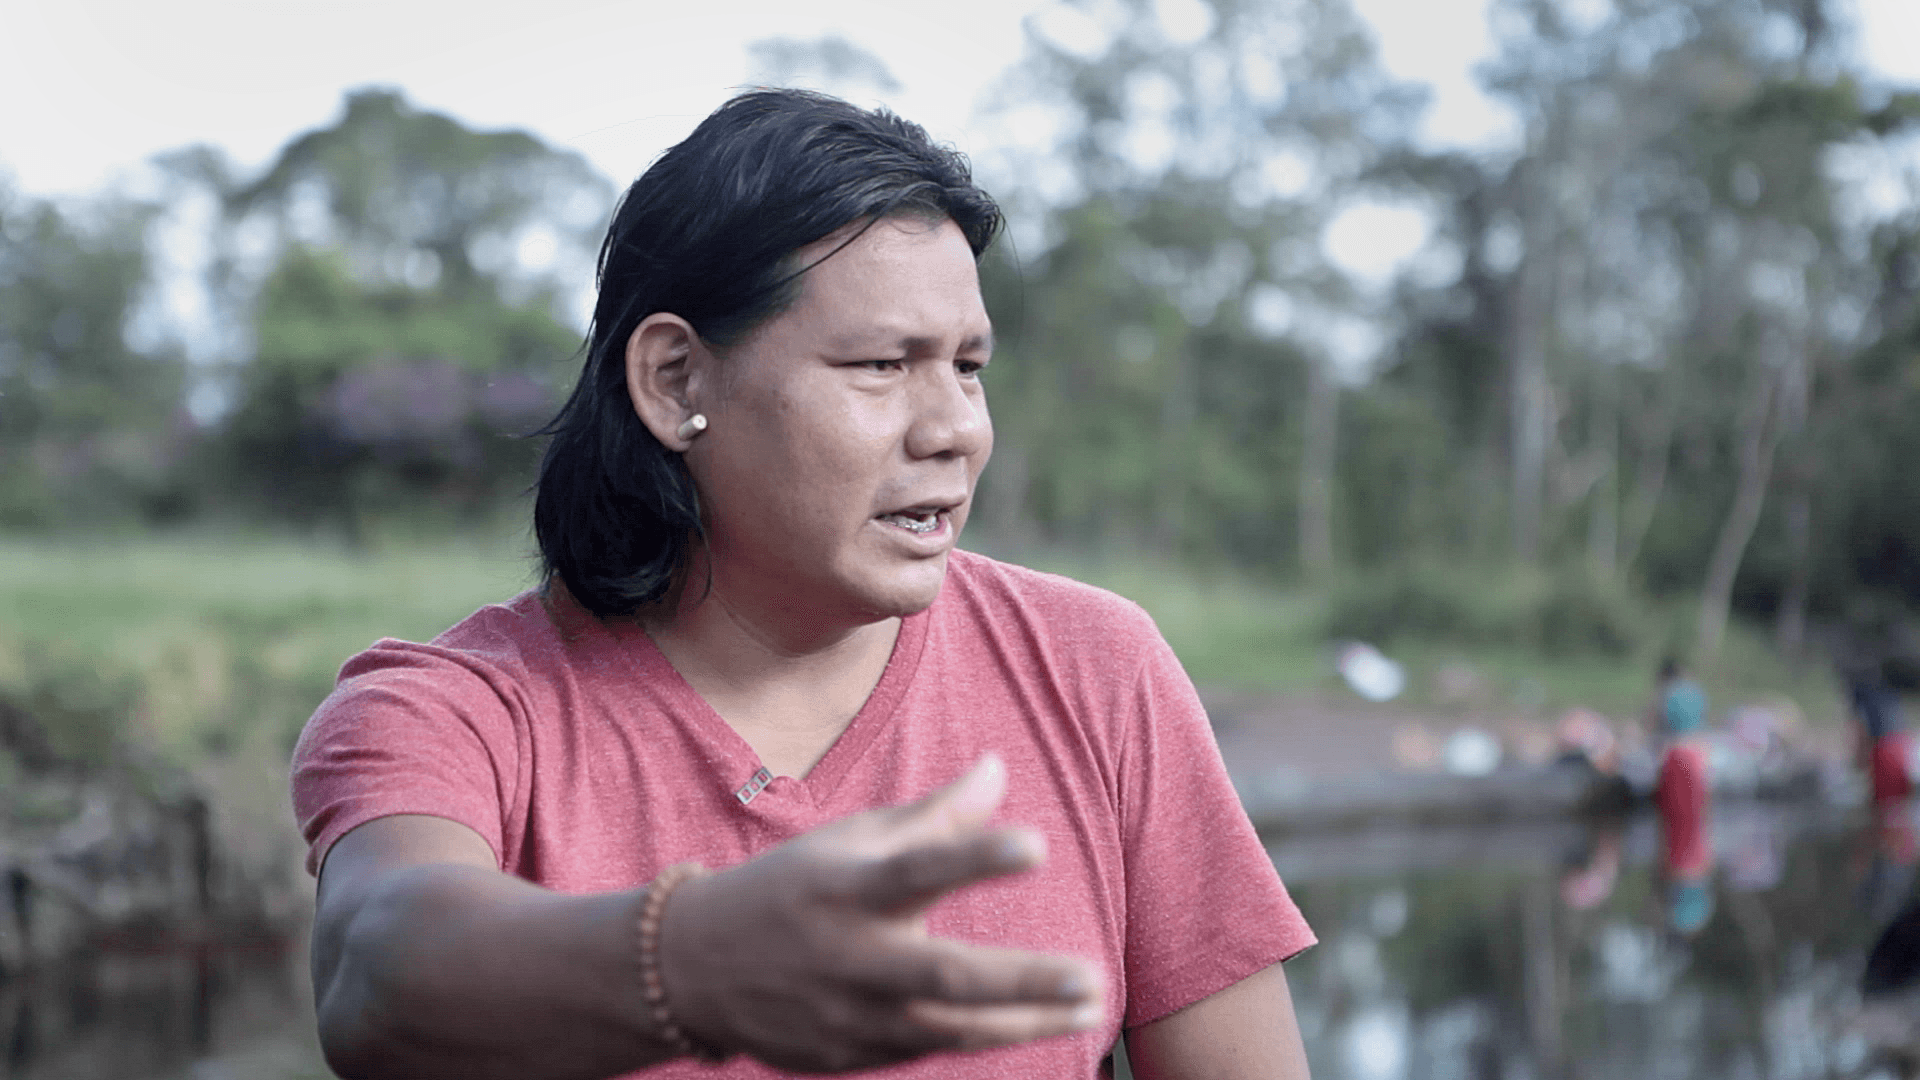 Xavante indigenous activist Hiparidi Toptiro has been fighting to keep his tribe's protected forests, in Mato Grosso state, safe from farmers looking to expand their soy fields. Toptiro has bullet scars testifying to the dangers of activism in Brazil.